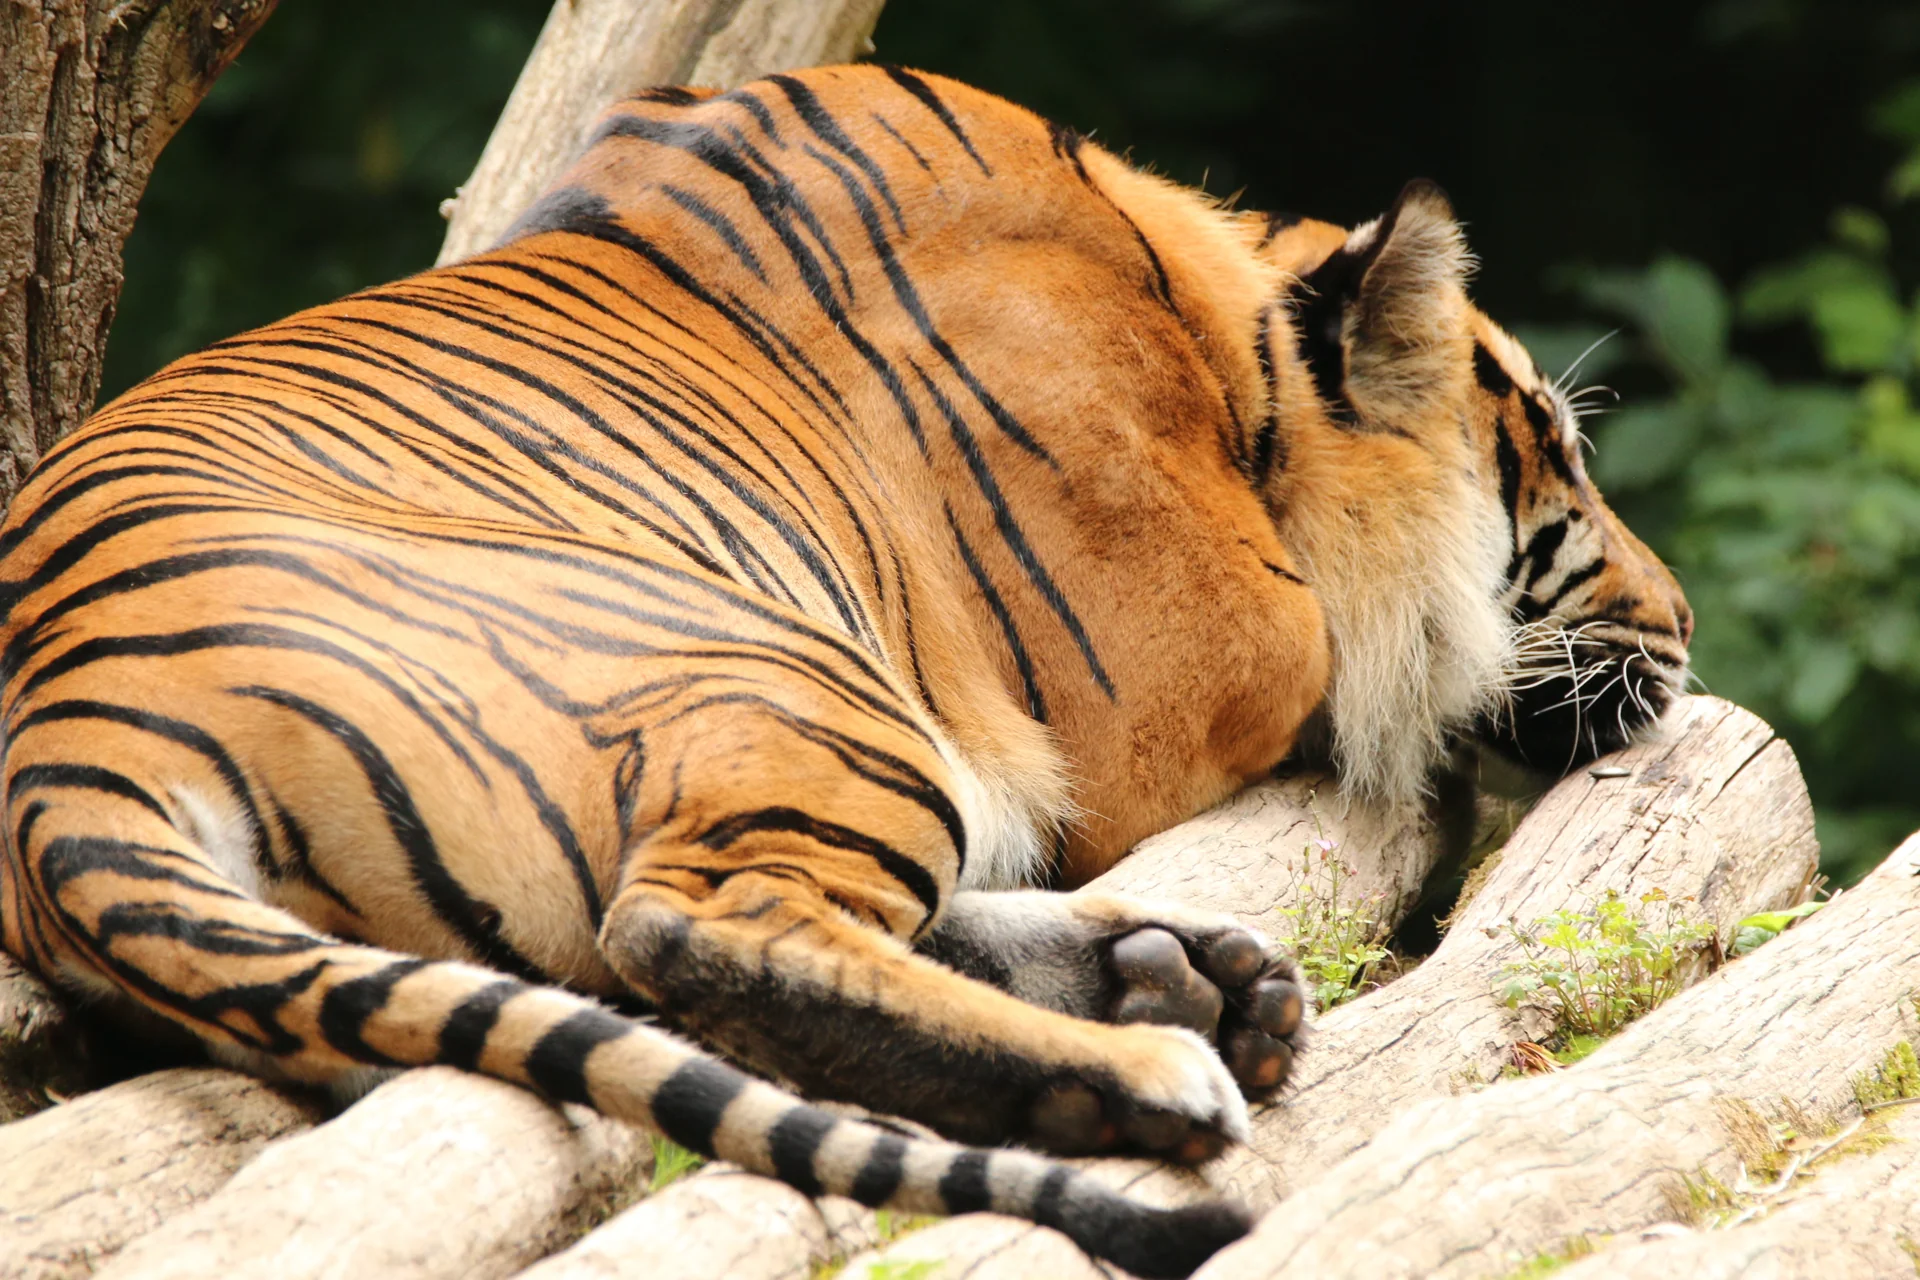 A very sleepy tiger sleeping on a wooden lookout ignoring everyone, especially the ones trying to take photos.